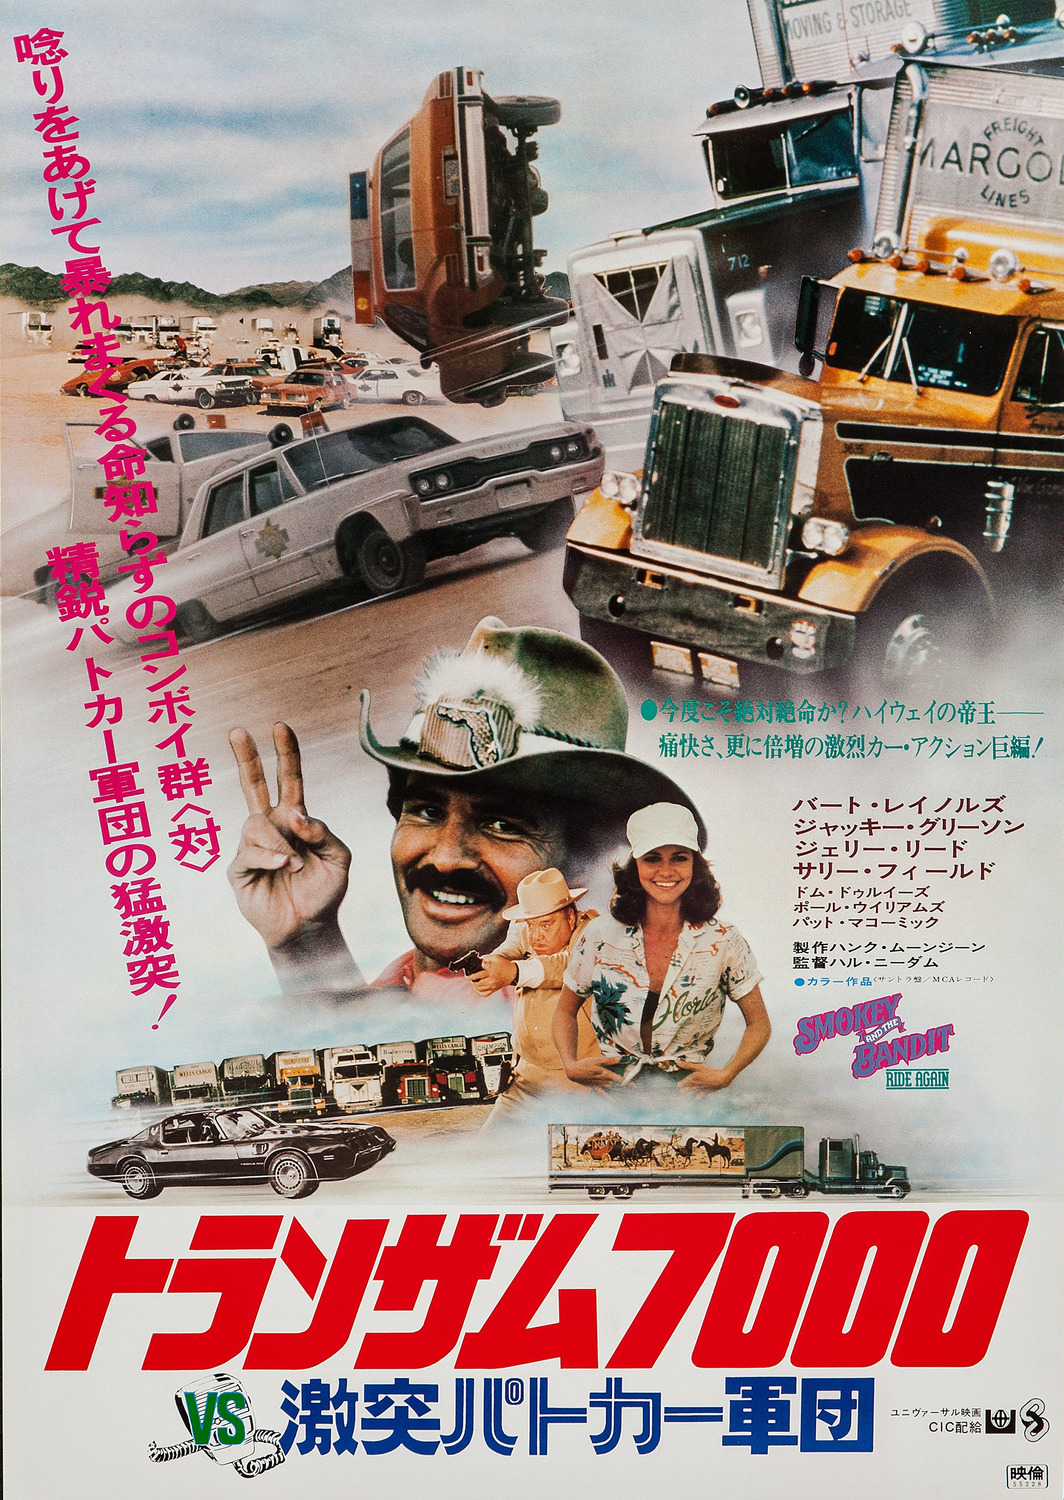 Extra Large Movie Poster Image for Smokey and the Bandit II (#2 of 2)